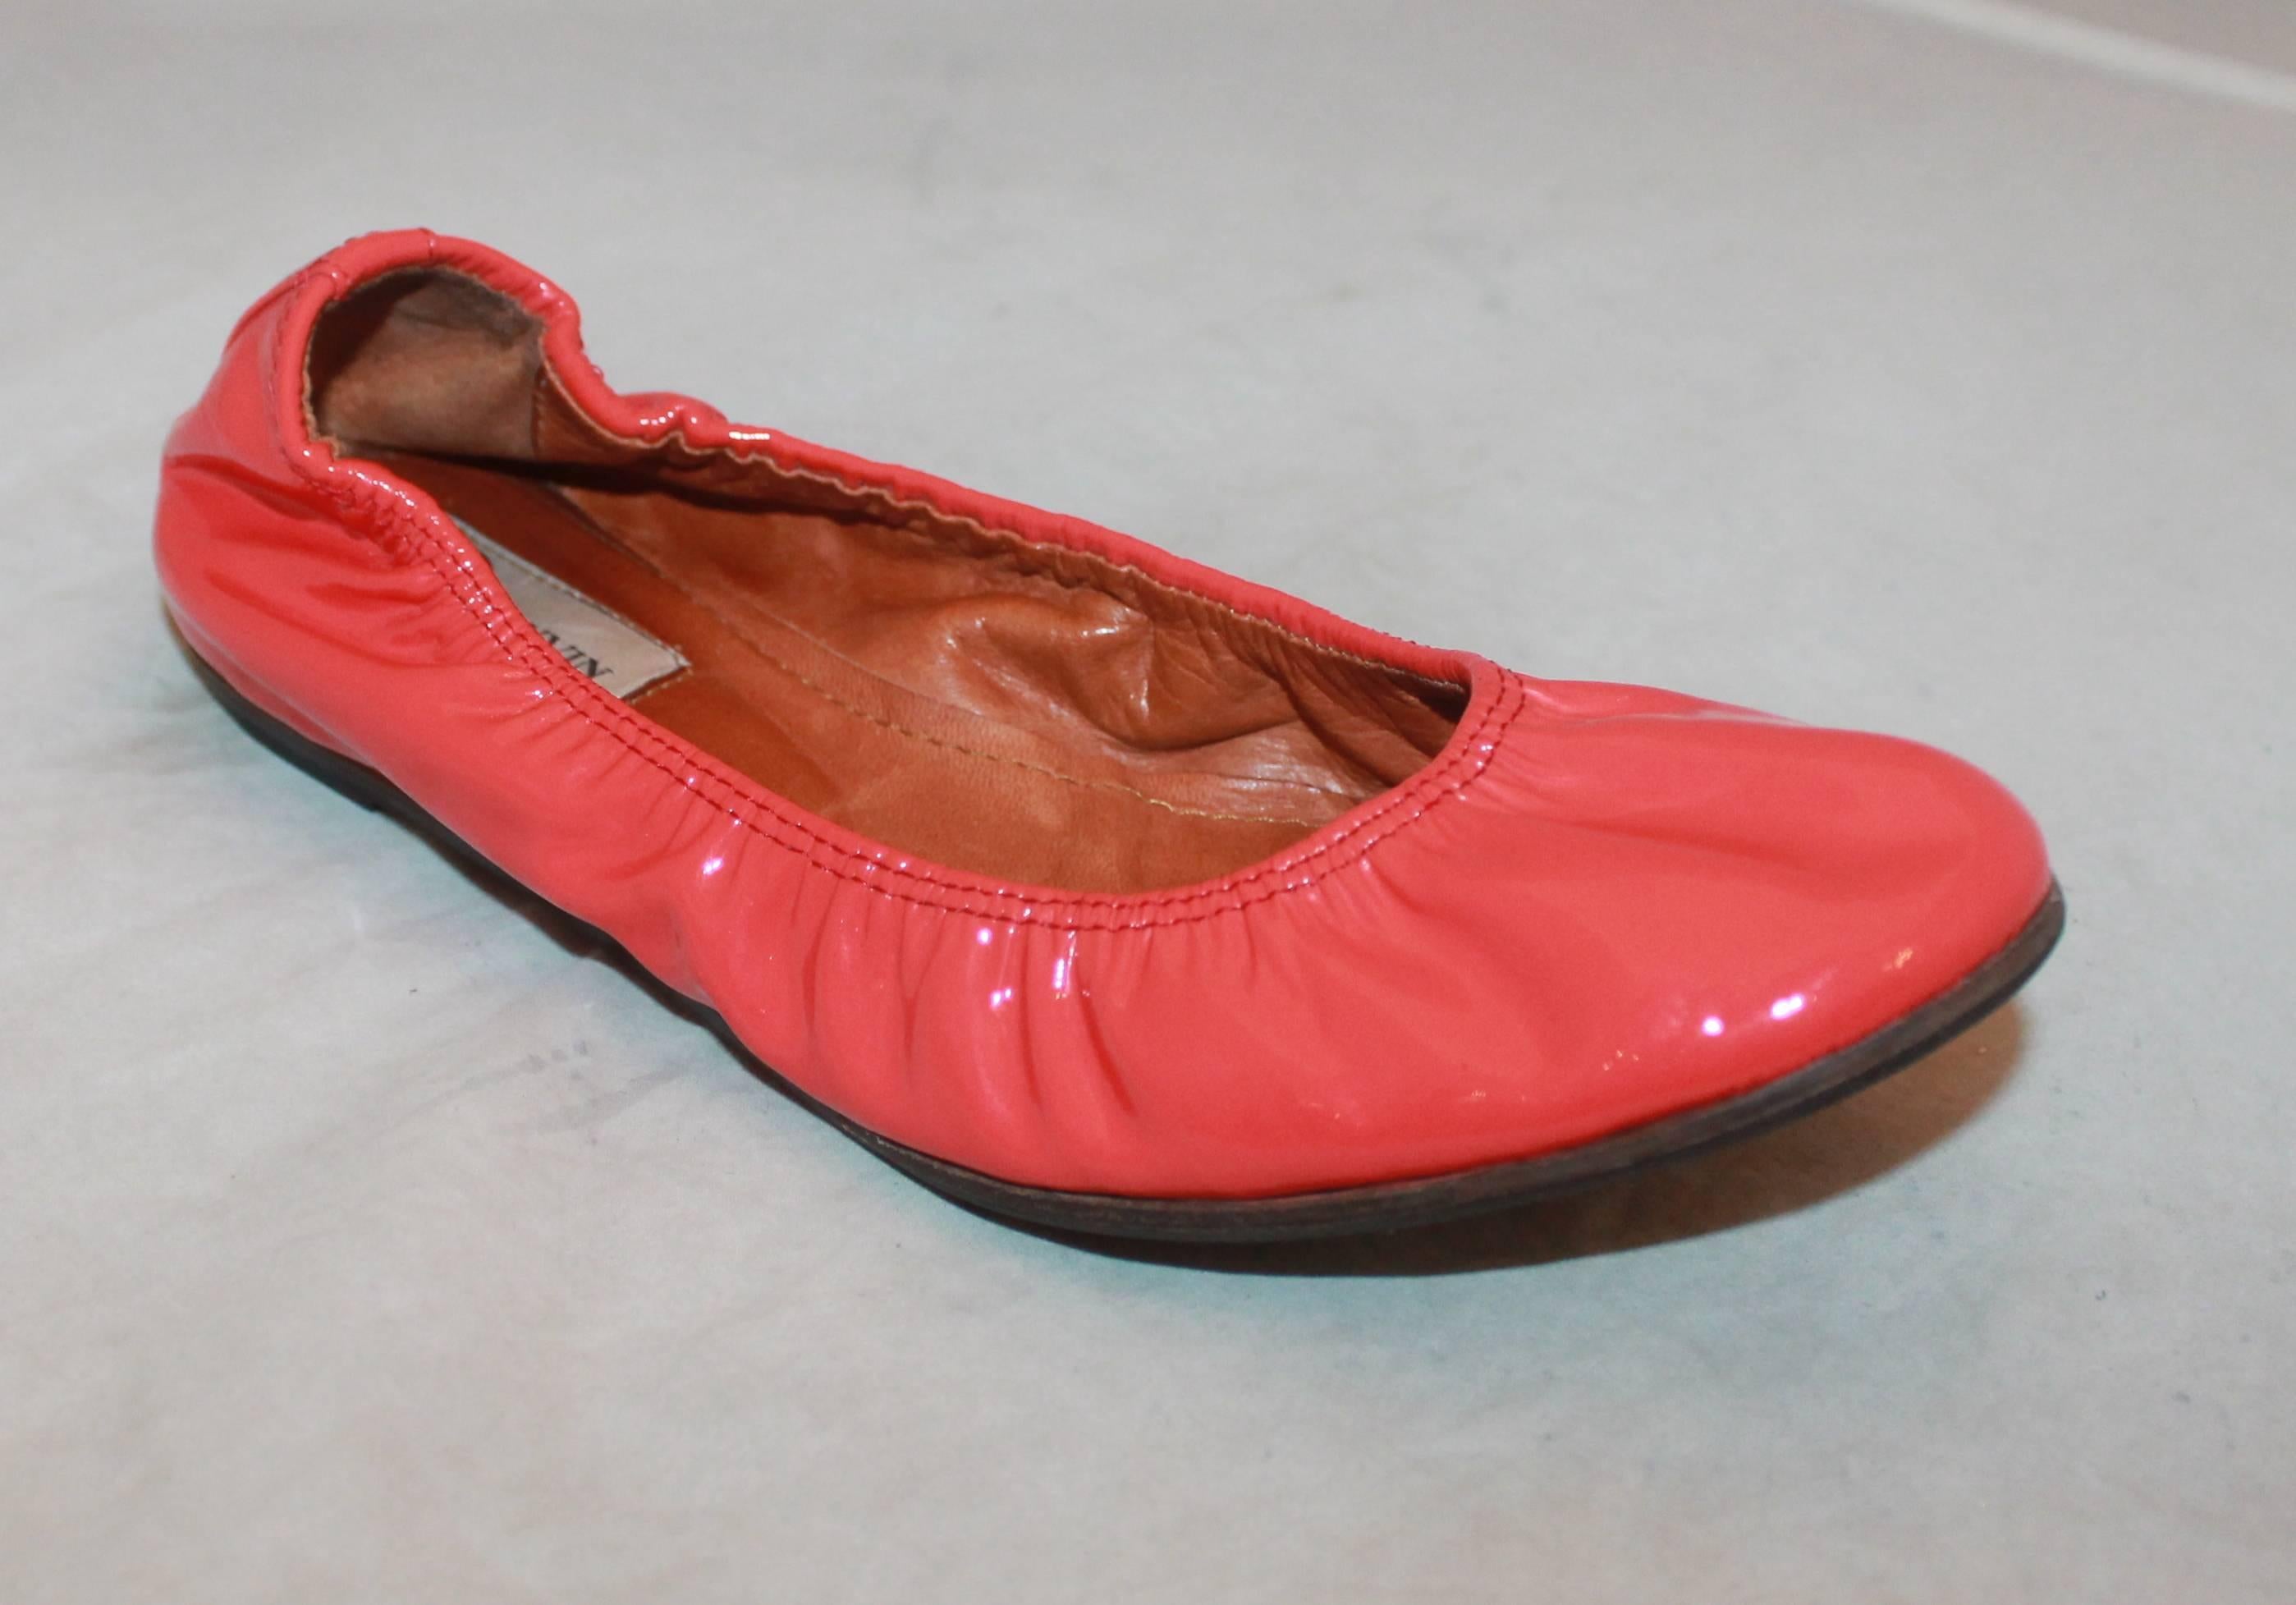 Lanvin Coral Patent Ballet Flats w/ Interior Leather Lining - 8.  These adorable flats are in excellent condition; they were worn maybe once.  They feature a gorgeous coral patent material, the ballet style, and a leather interior.